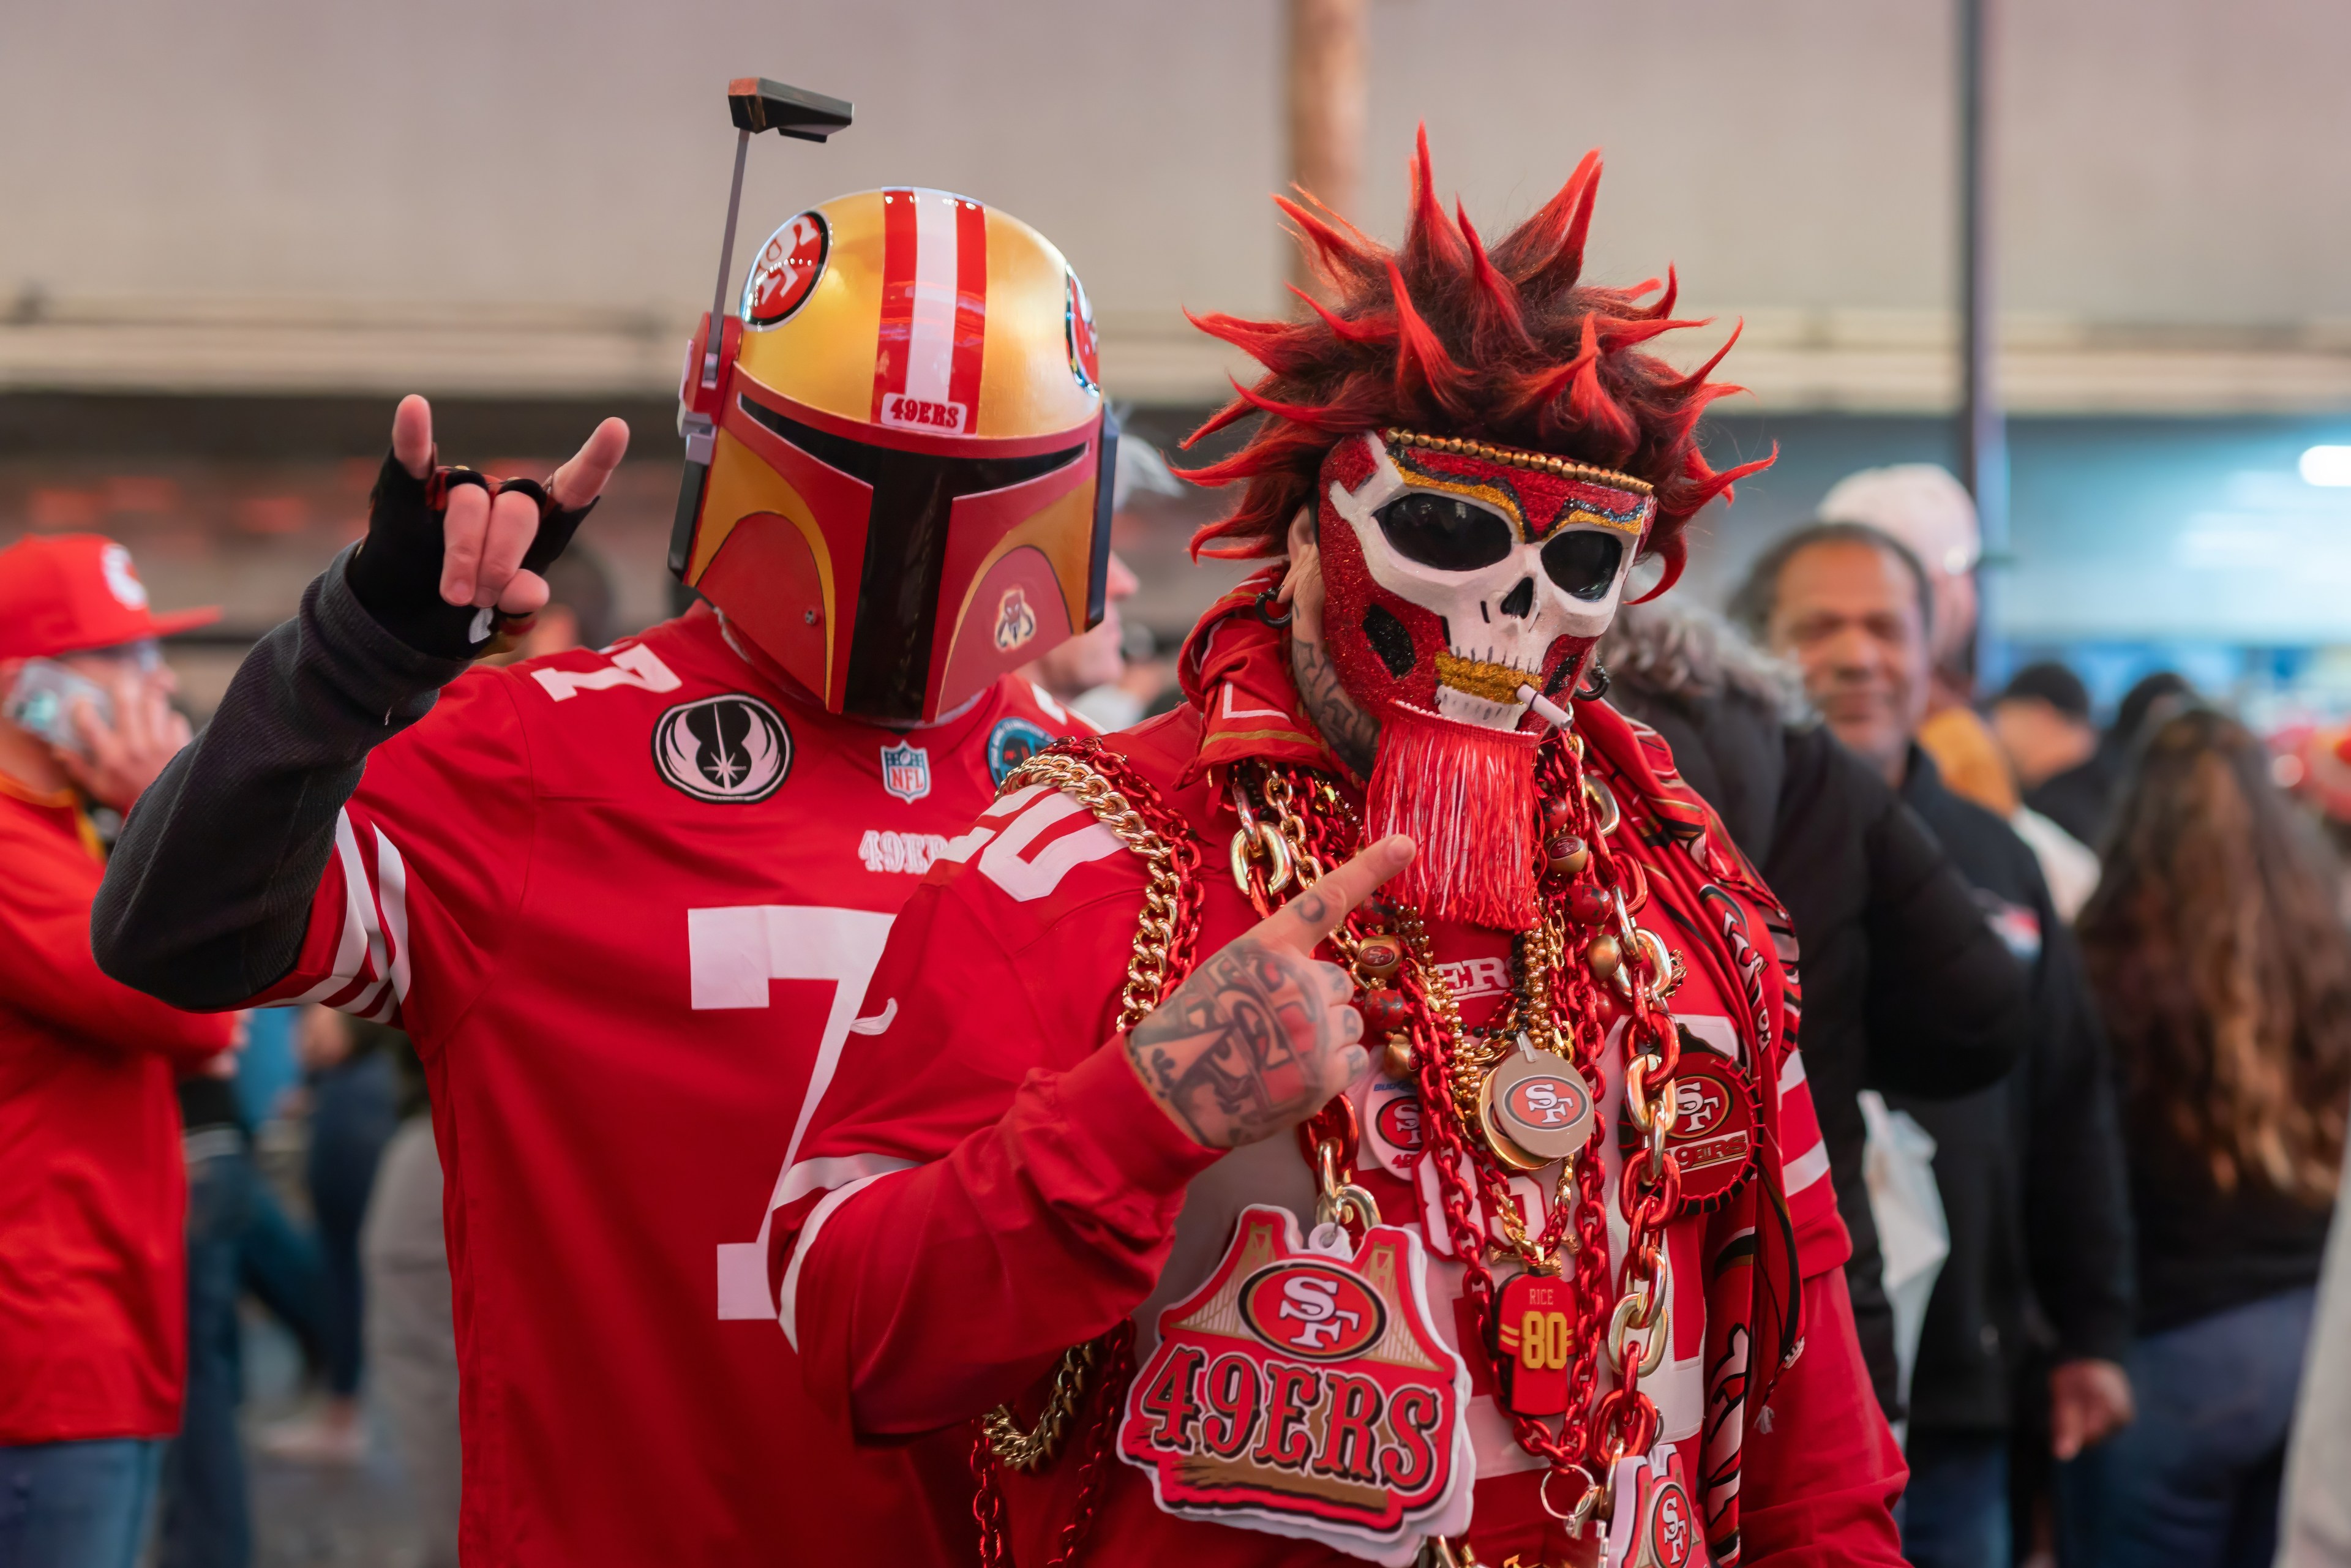 Fans wear red 49ers jerseys with masks